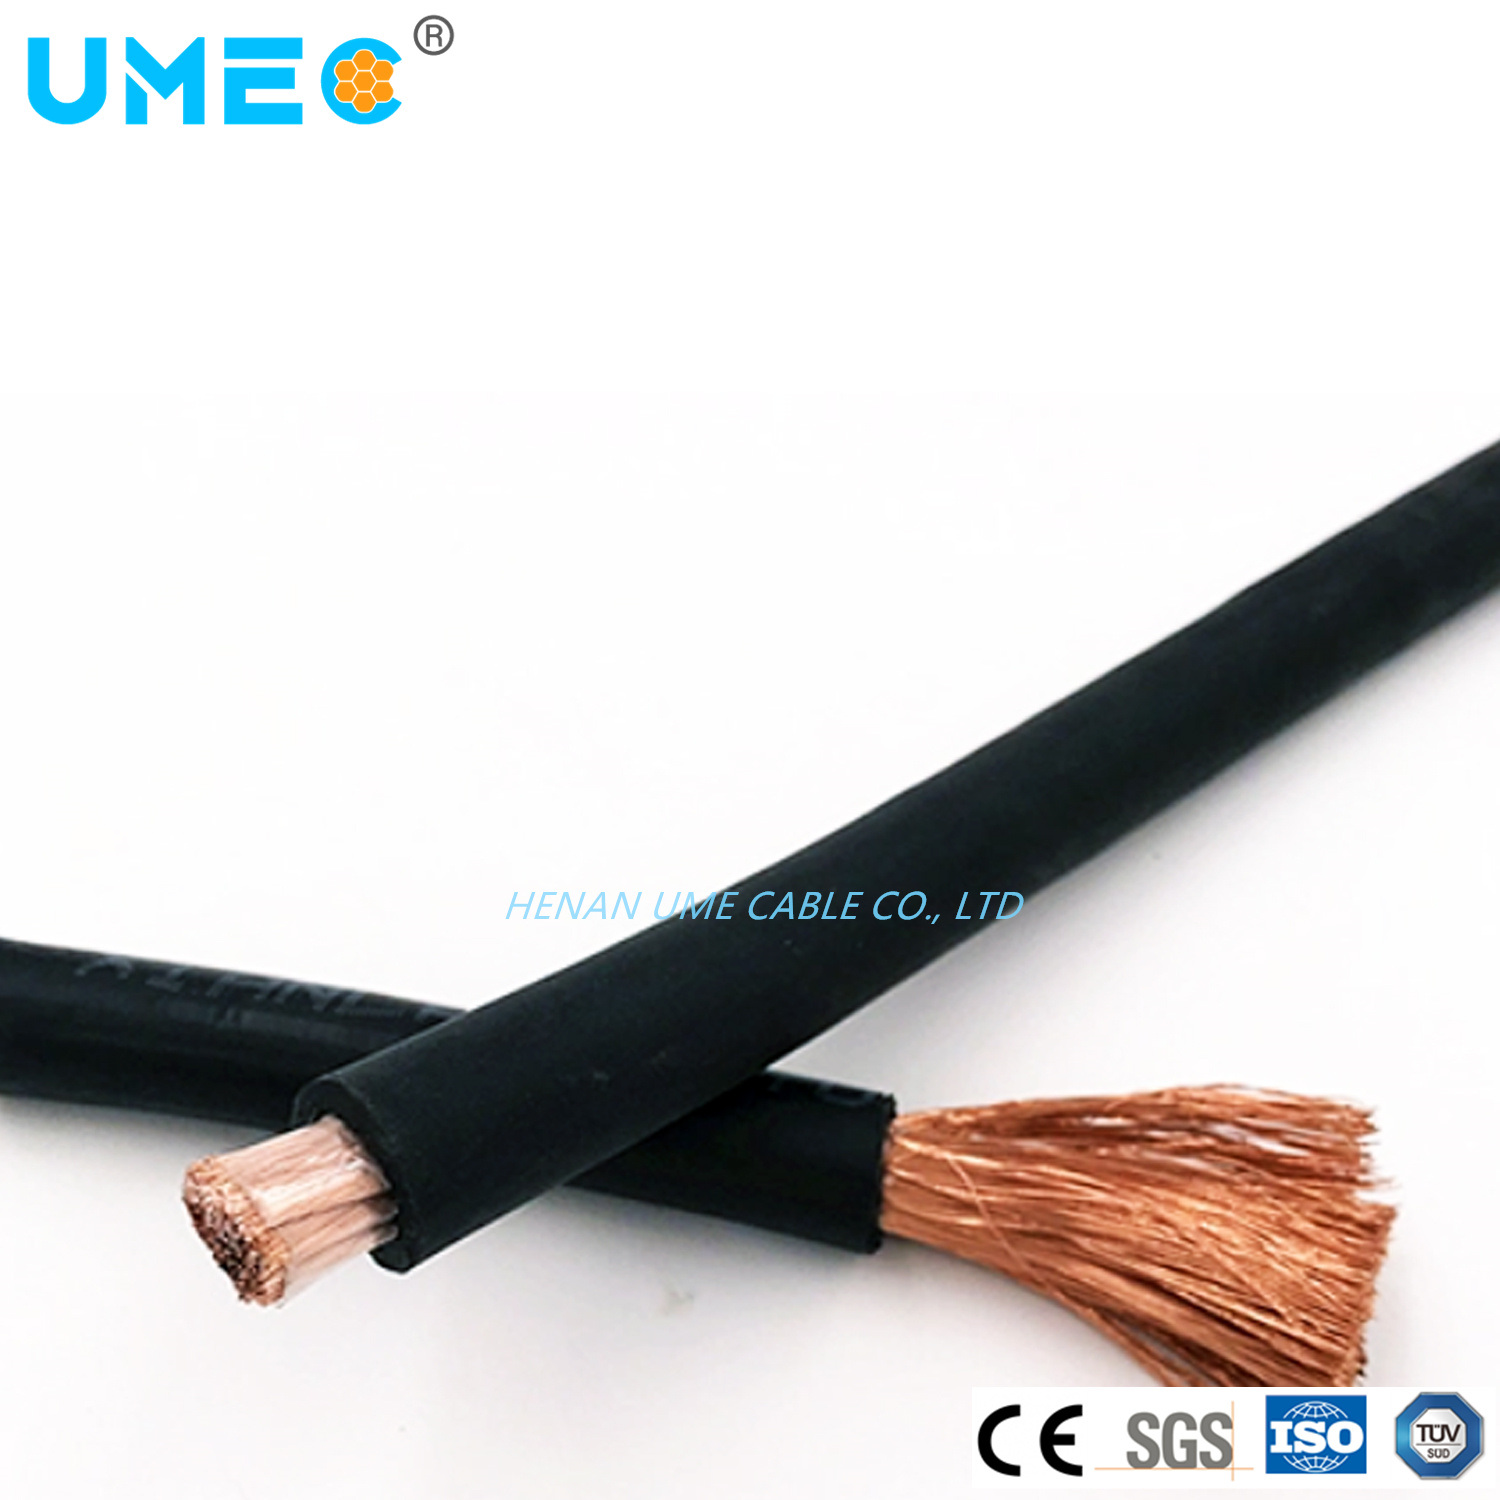 IEC60332 1kv Flame Retardant Ho1n2-D Cable Class 5 Conductor Neoprene Arc Welding Cable 50mm2 Welding Cable